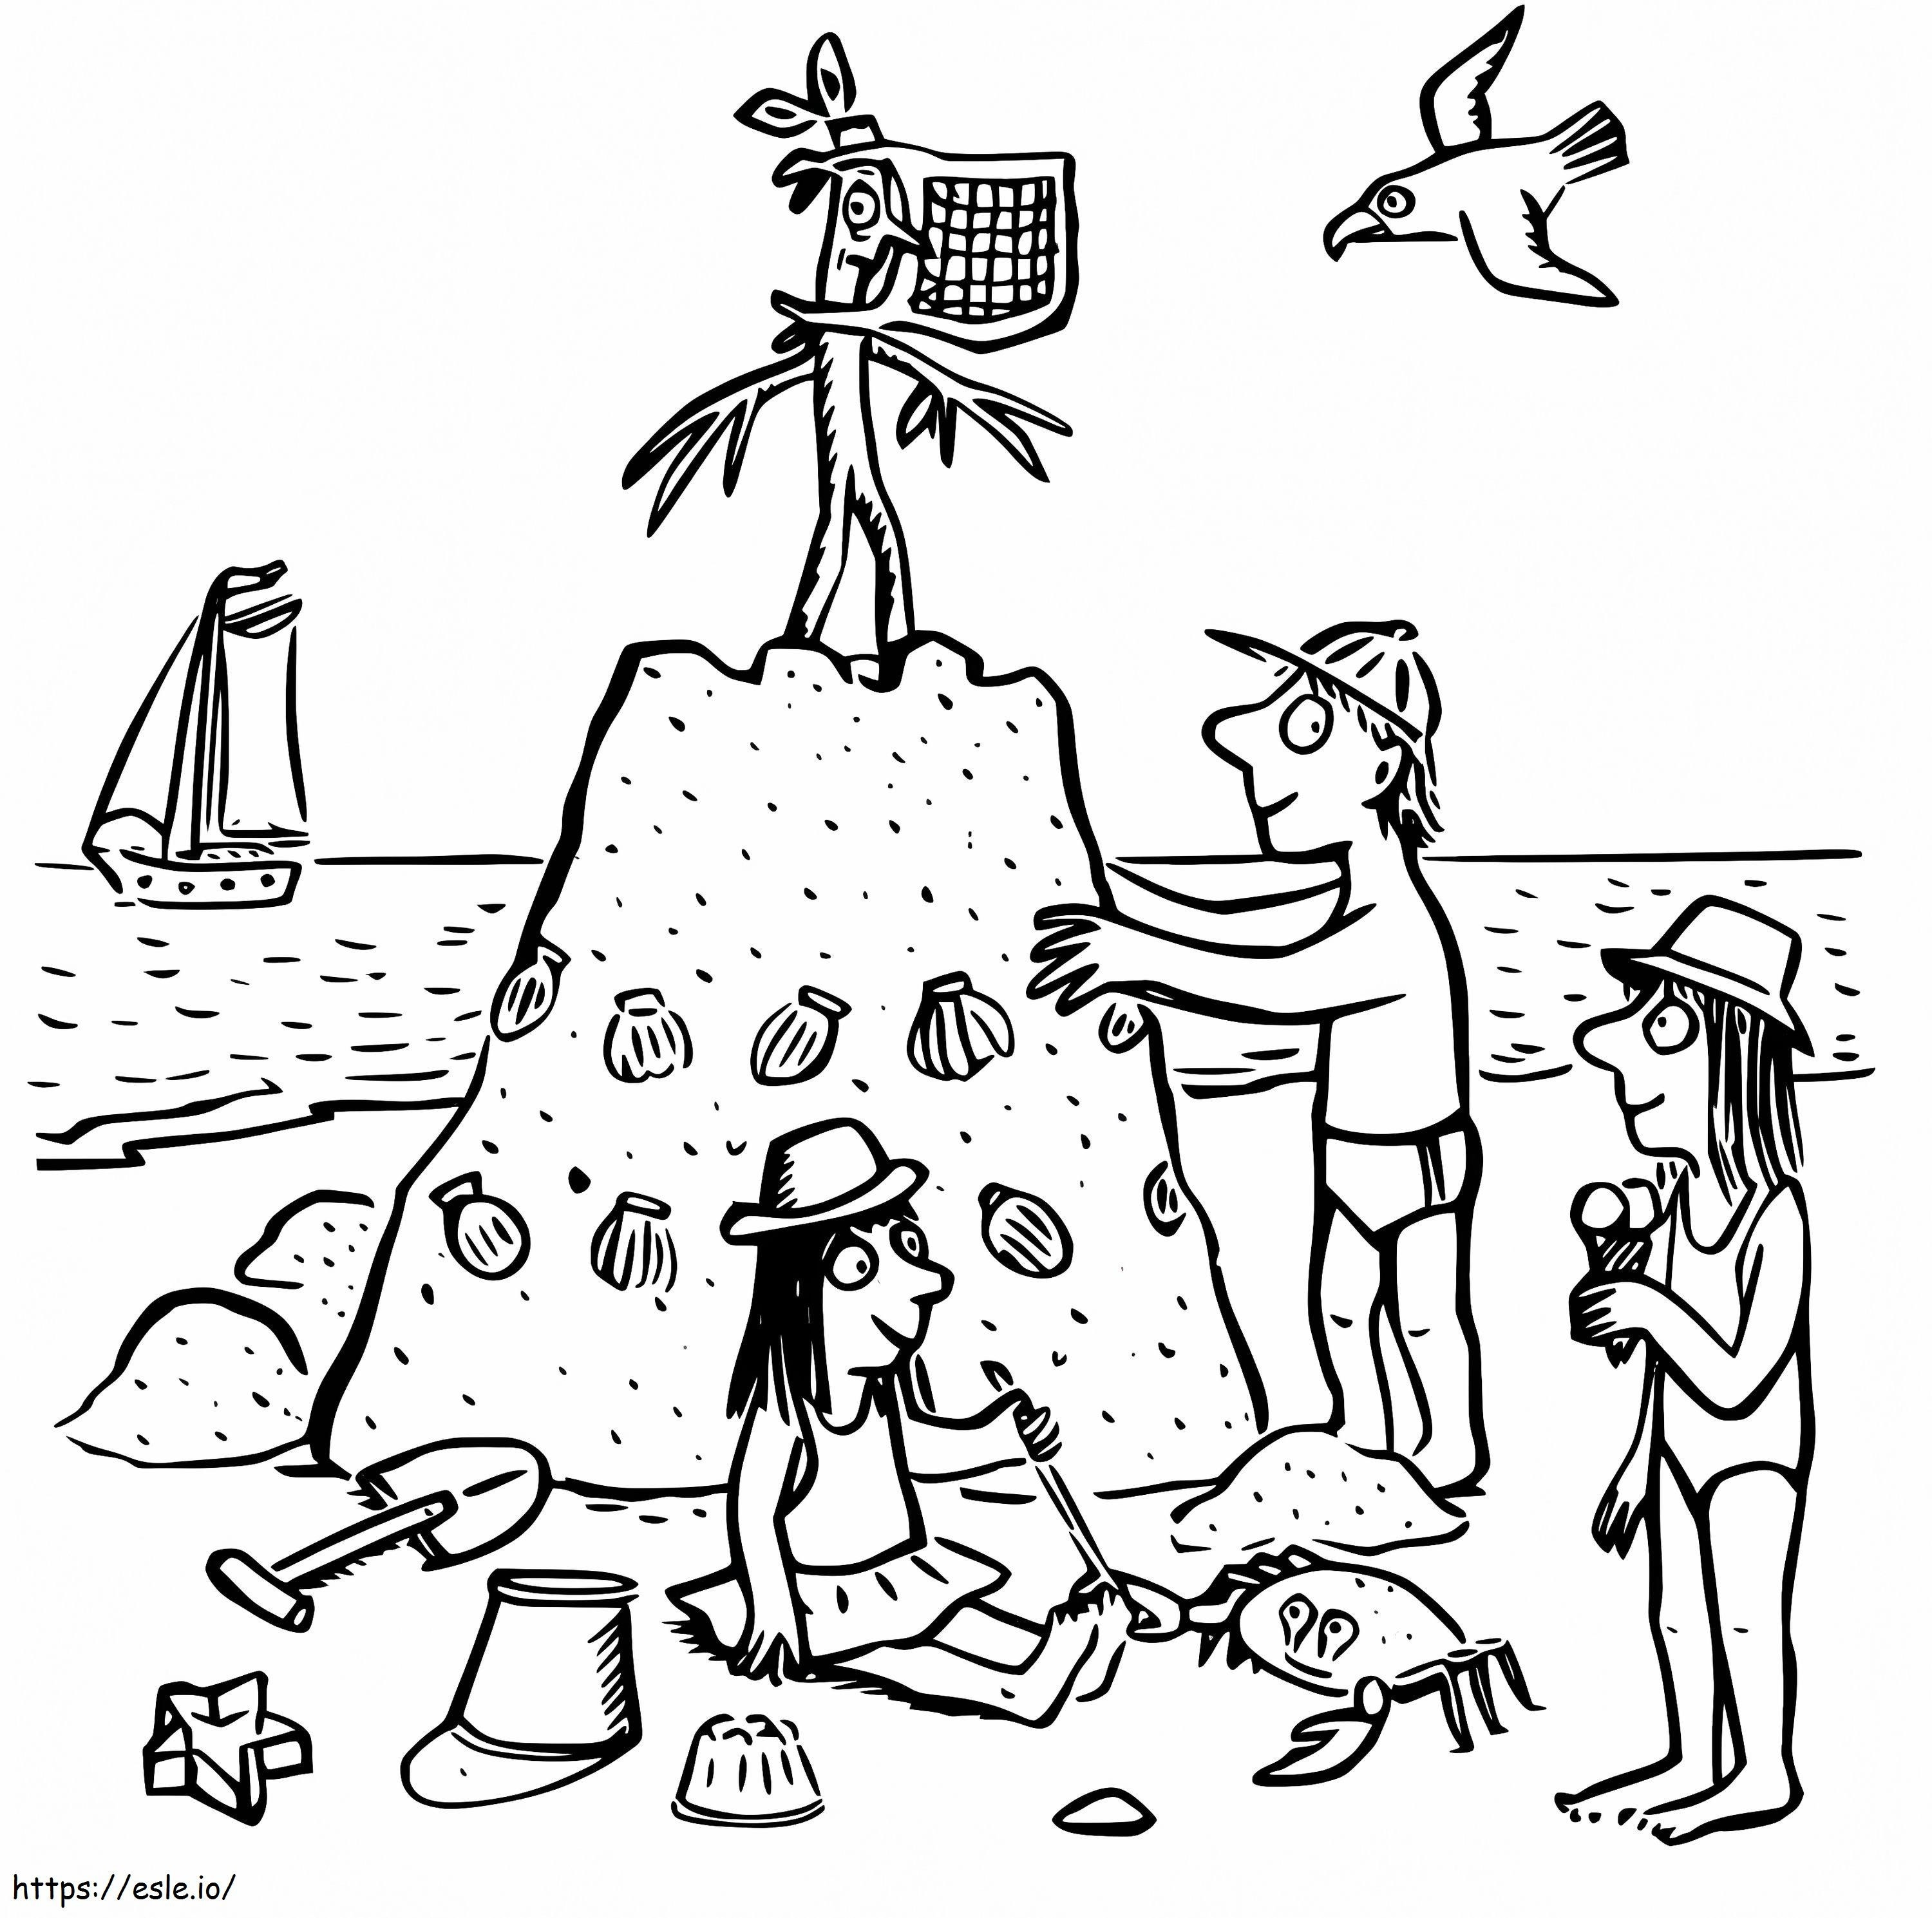 Stick Man On The Beach coloring page